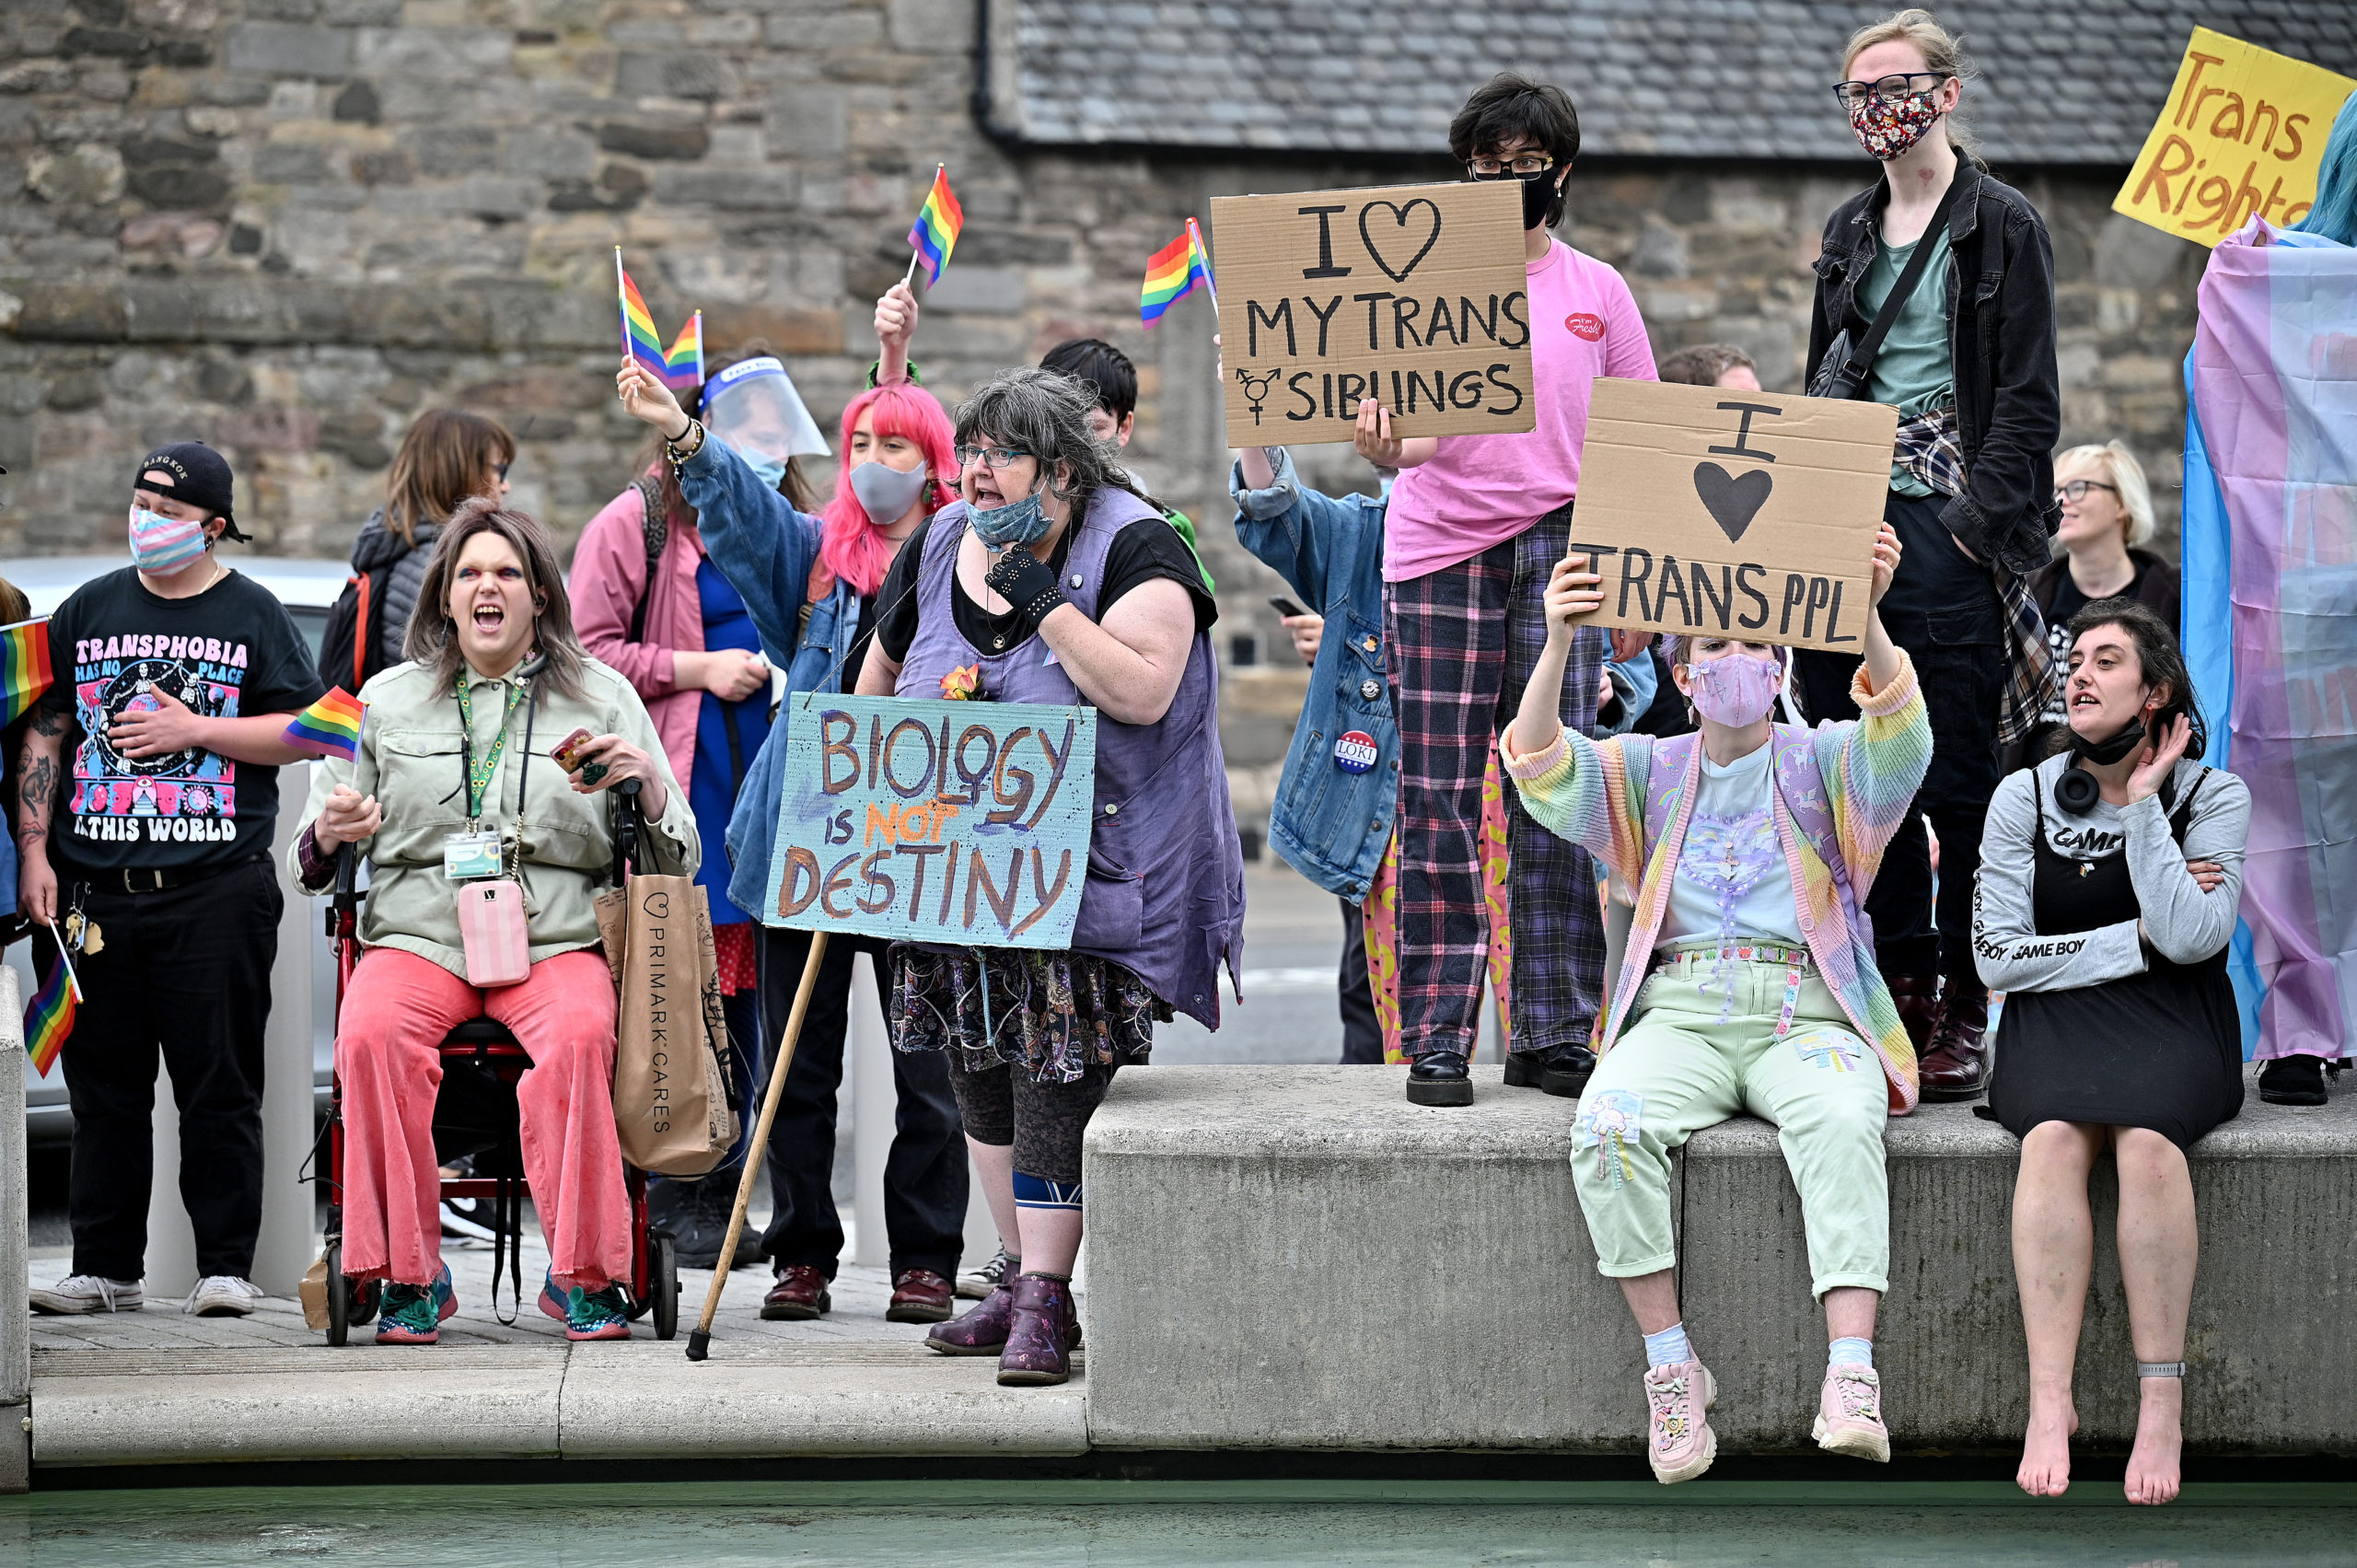 EDINBURGH, SCOTLAND - SEPTEMBER 02: Trans activists hold a counter demonstration next to a woman’s rights demo organised by Women Wont Wheesht on September 02, 2021 in Edinburgh, Scotland. (Photo by Jeff J Mitchell/Getty Images)